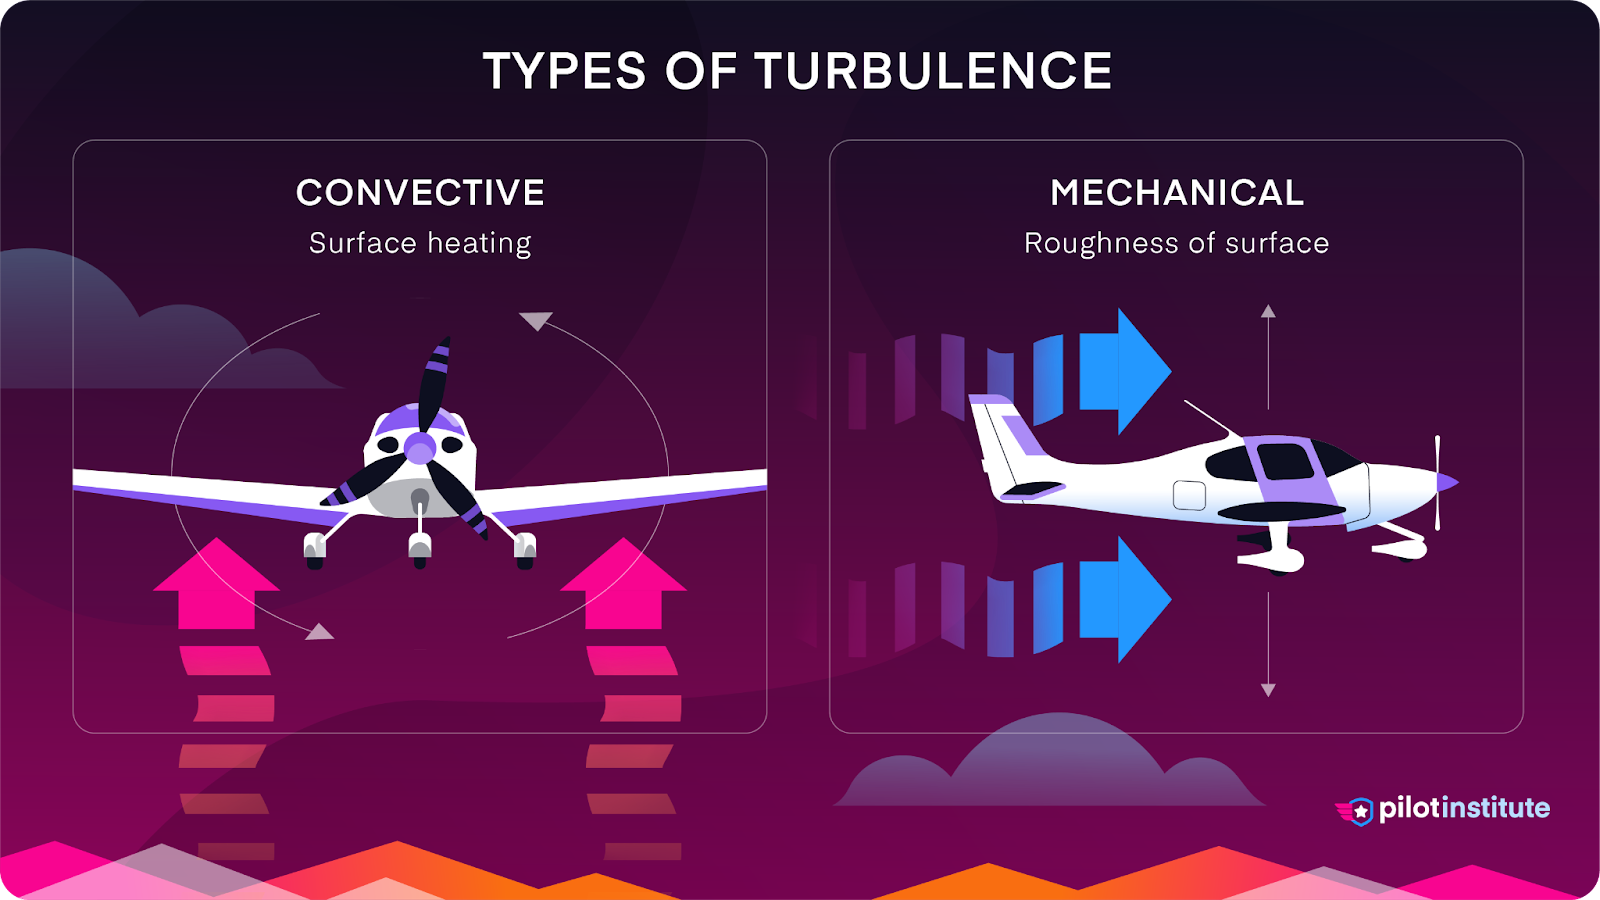 A diagram showing the types of turbulence: convective and mechanical.